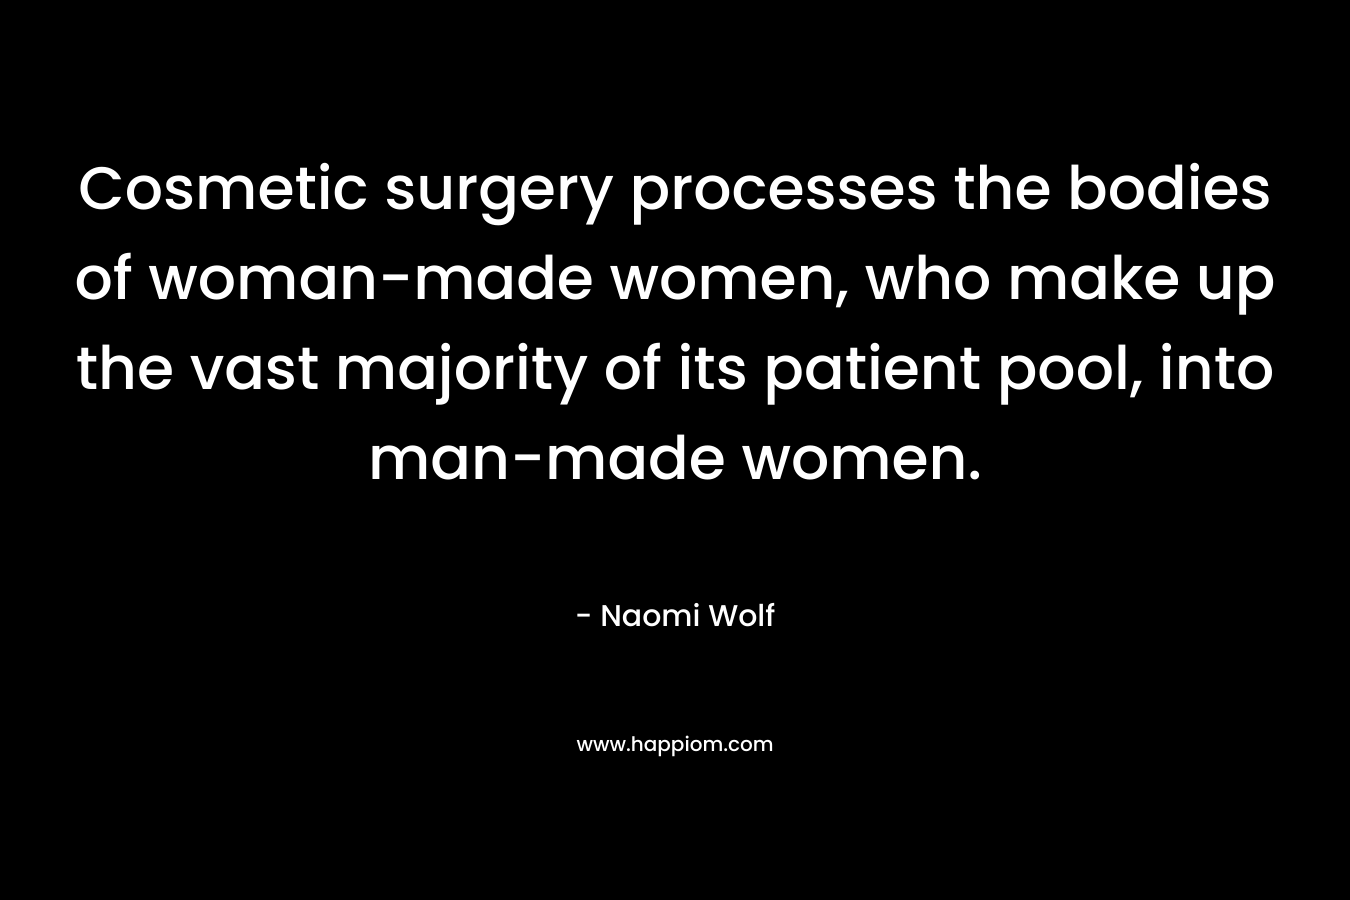 Cosmetic surgery processes the bodies of woman-made women, who make up the vast majority of its patient pool, into man-made women.